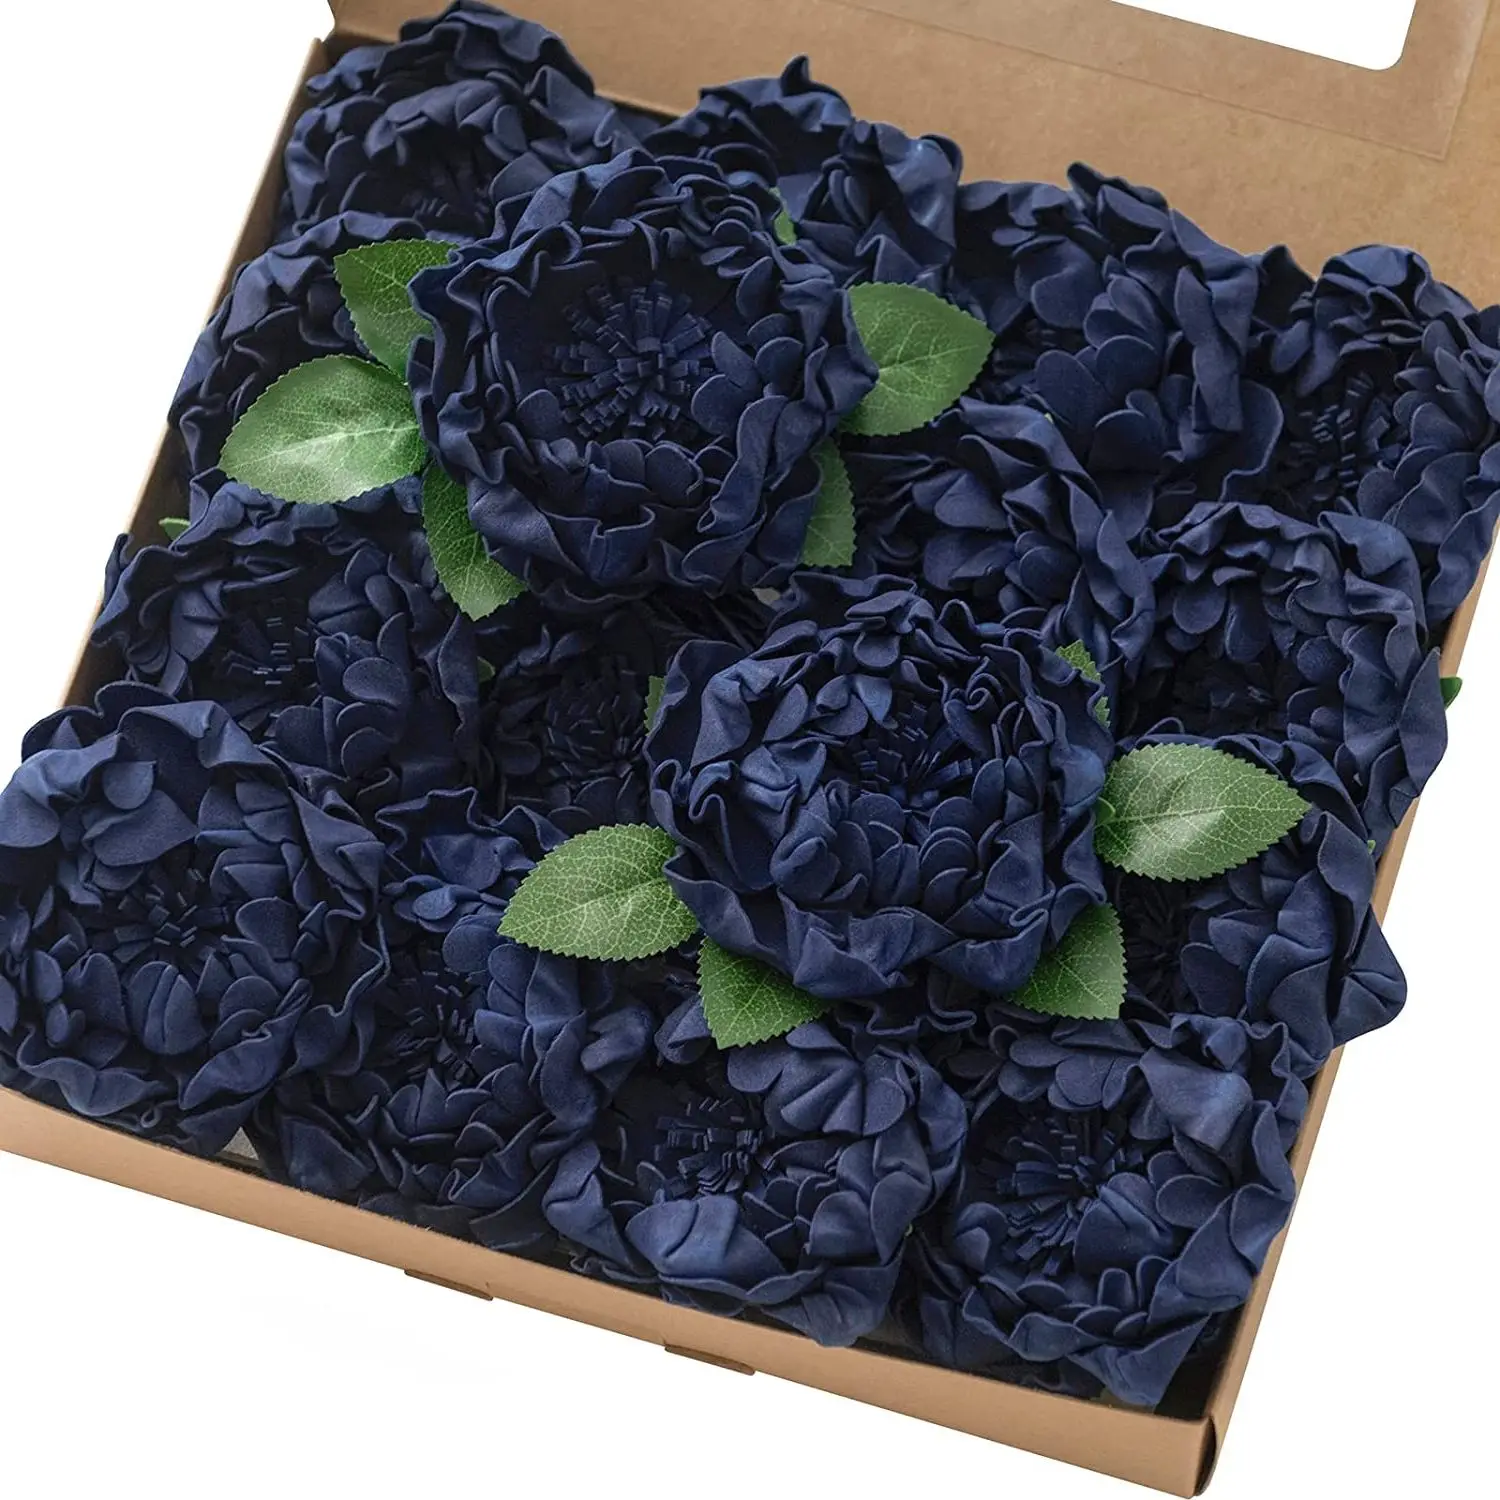 

Mefier Artificial Flower Fake Peony 16/32pcs Navy Blue Blooming Peonies w/Stem for DIY Wedding Bouquet Home Decorations